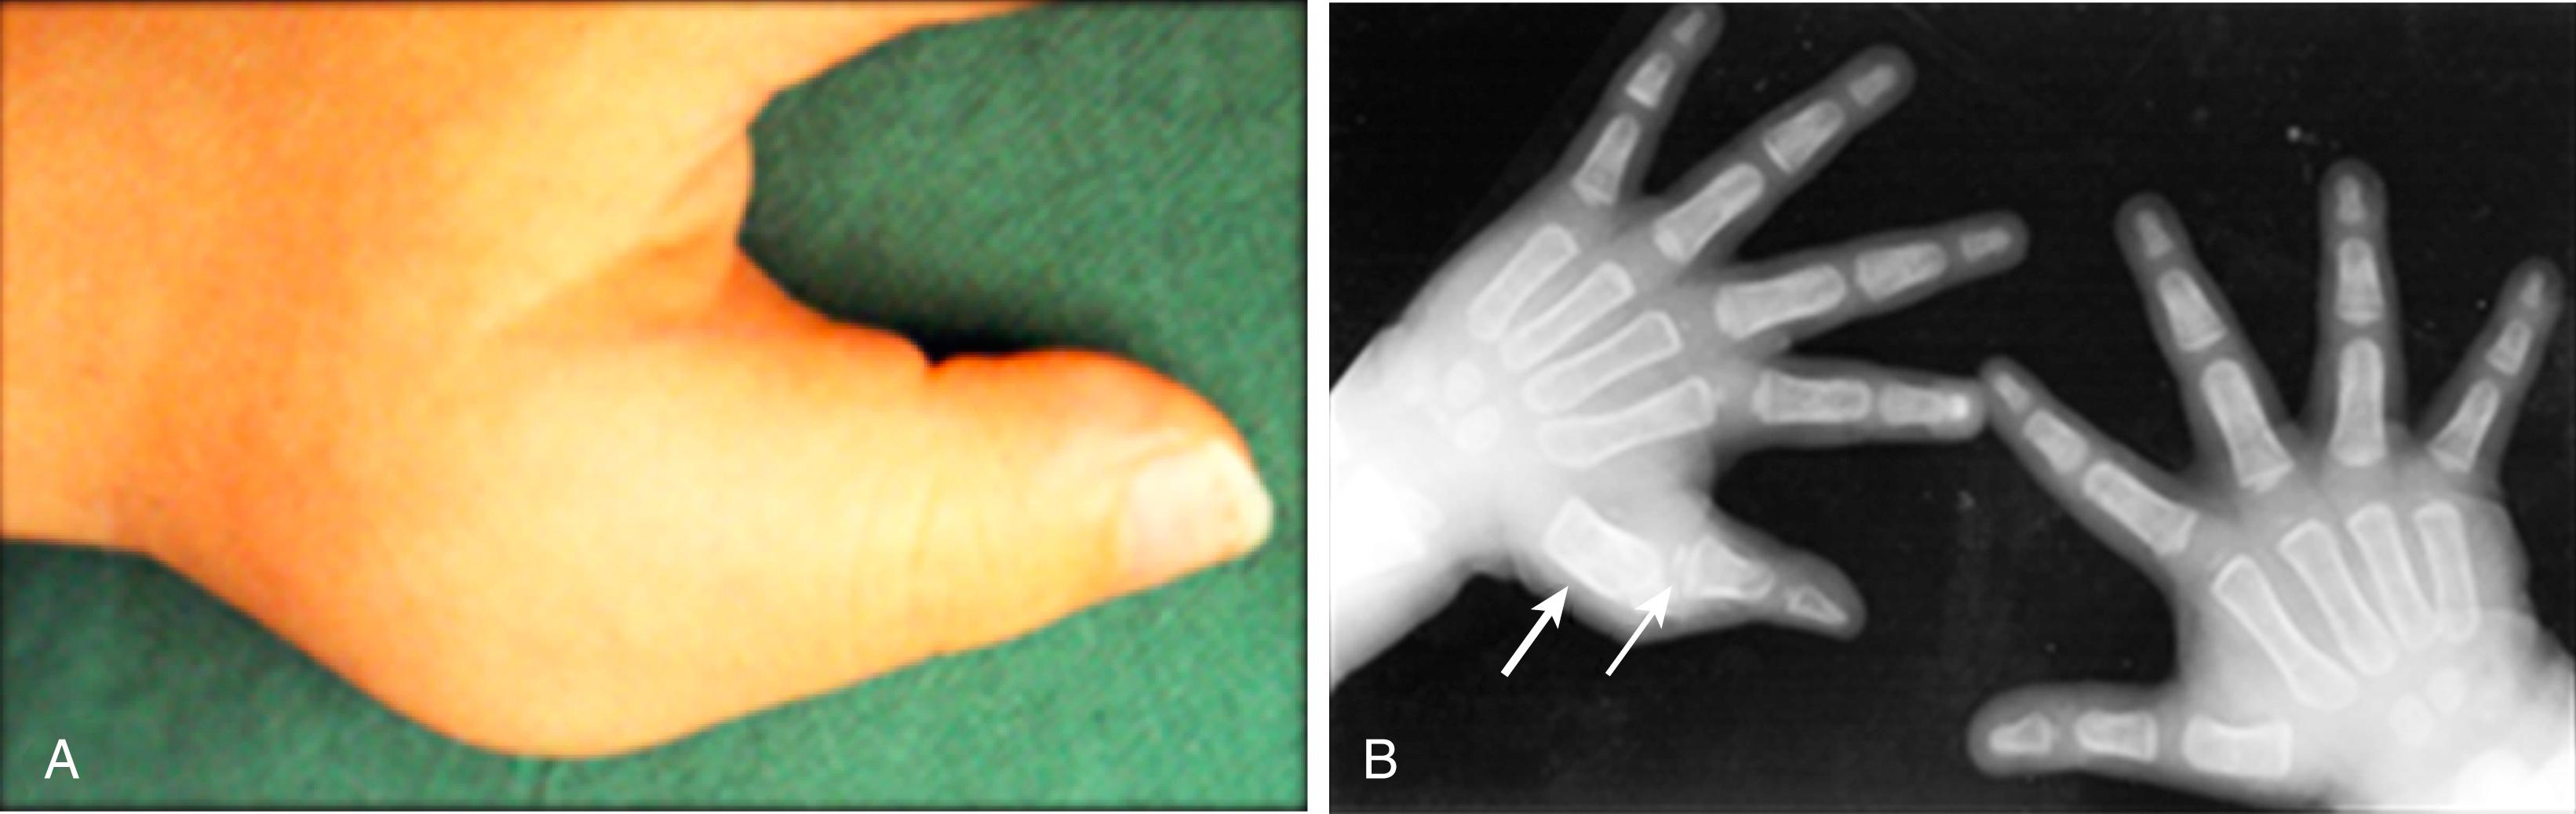 Fig. 18.1, Images of an 18-month-old boy presenting with seronegative polyarticular juvenile idiopathic arthritis (JIA). Swelling of the right thumb was associated with clinical signs of intraarticular fluid and synovial hypertrophy ( A ) and radiographic evidence ( B ) of soft tissue swelling, bony overgrowth of the first metacarpal ( thick arrow ) and premature ossification of the proximal phalange growth center ( thin arrow ).